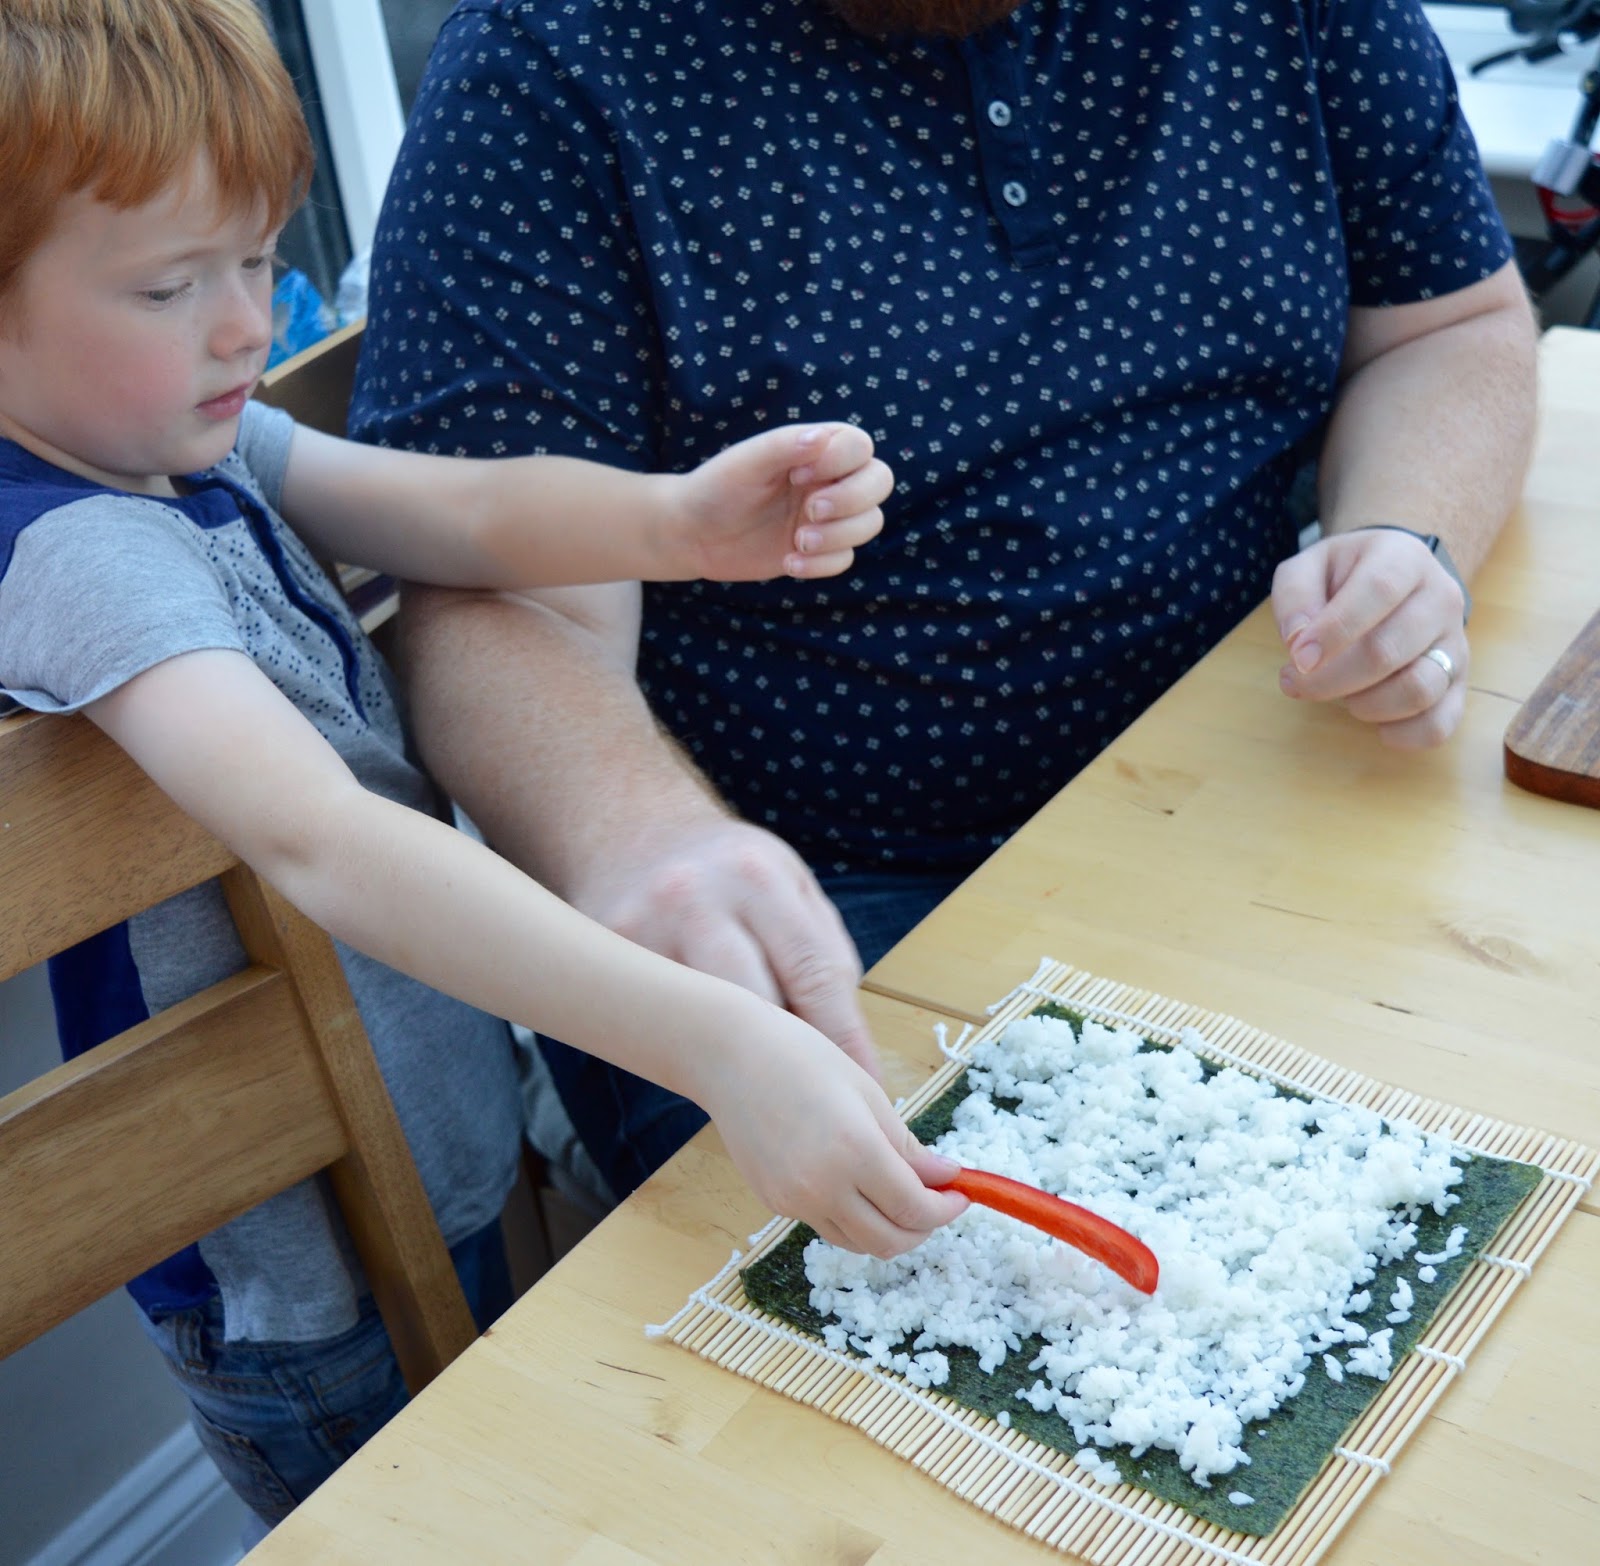 Sushi Making With Kids - A Tutorial for Beginners with Yutaka